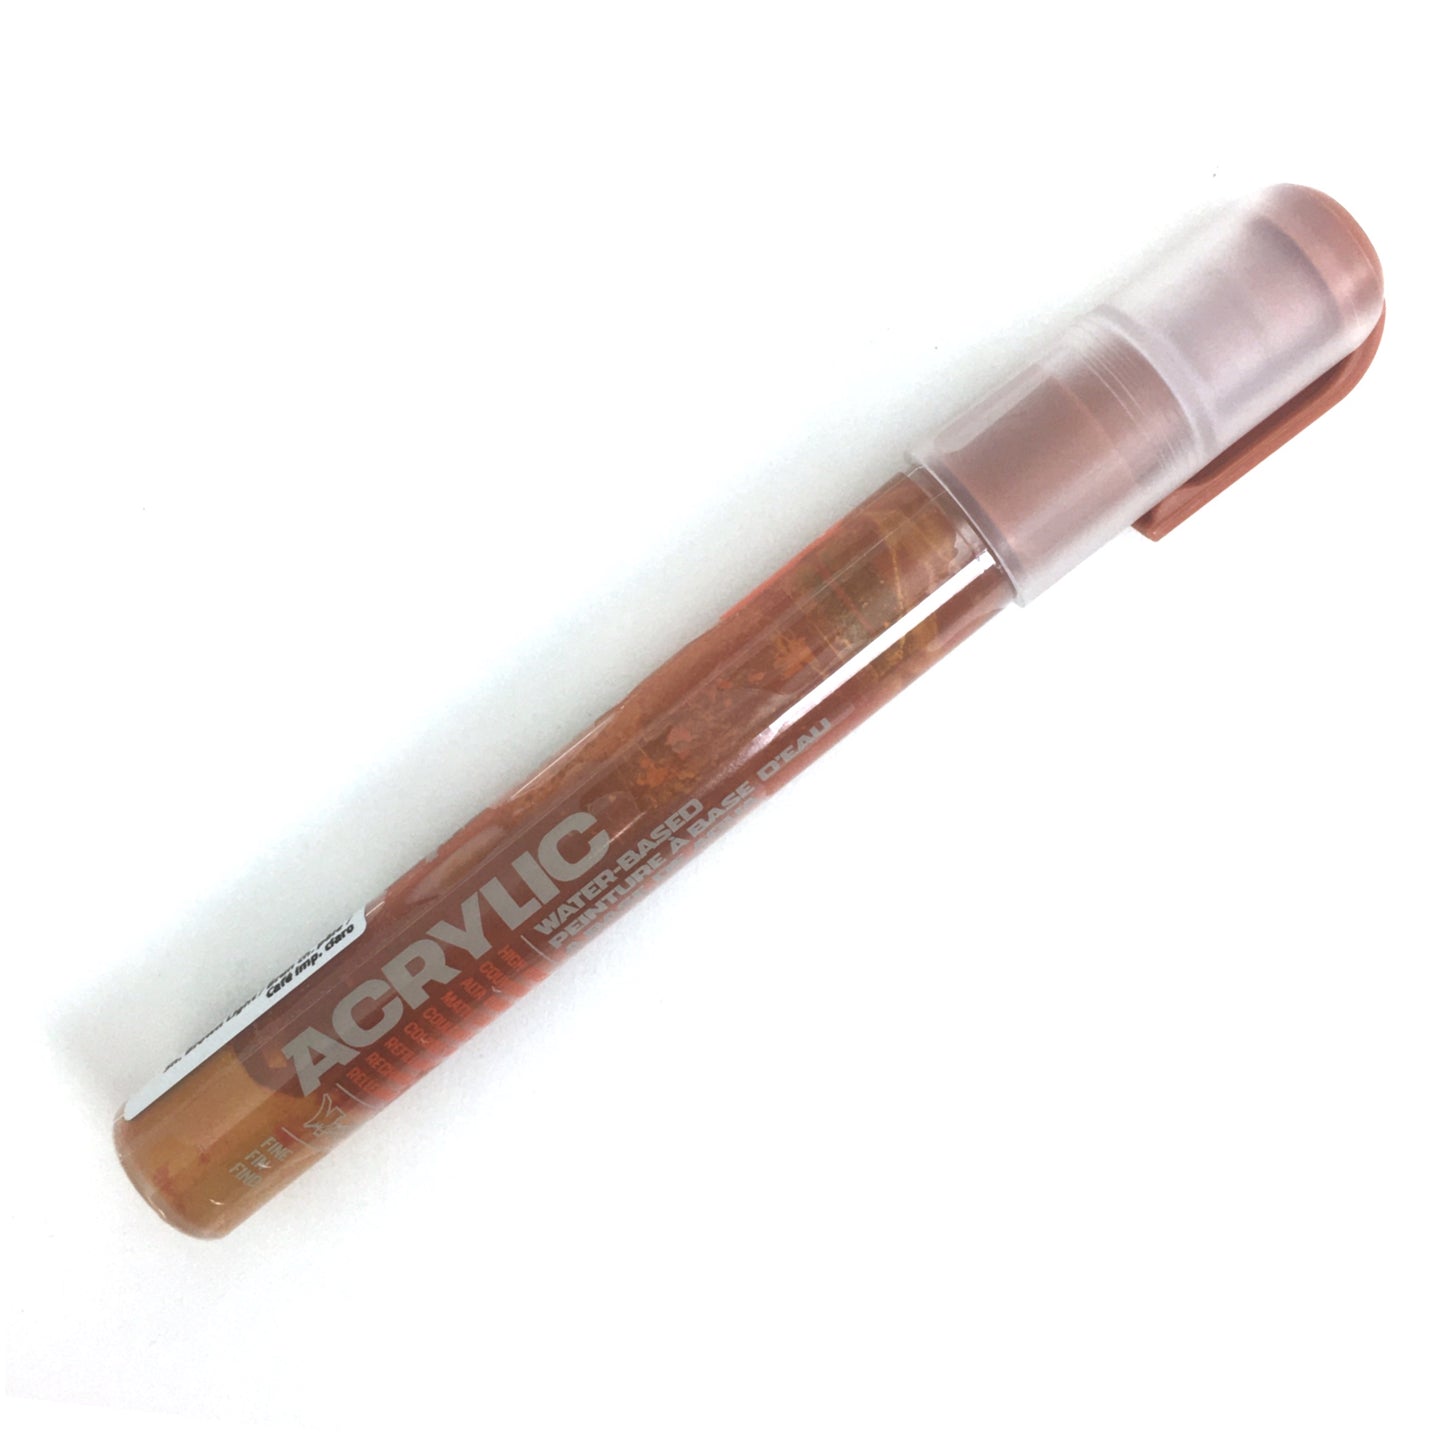 Montana Acrylic Paint Markers - Individuals - Shock Brown Light / 2 mm by Montana - K. A. Artist Shop